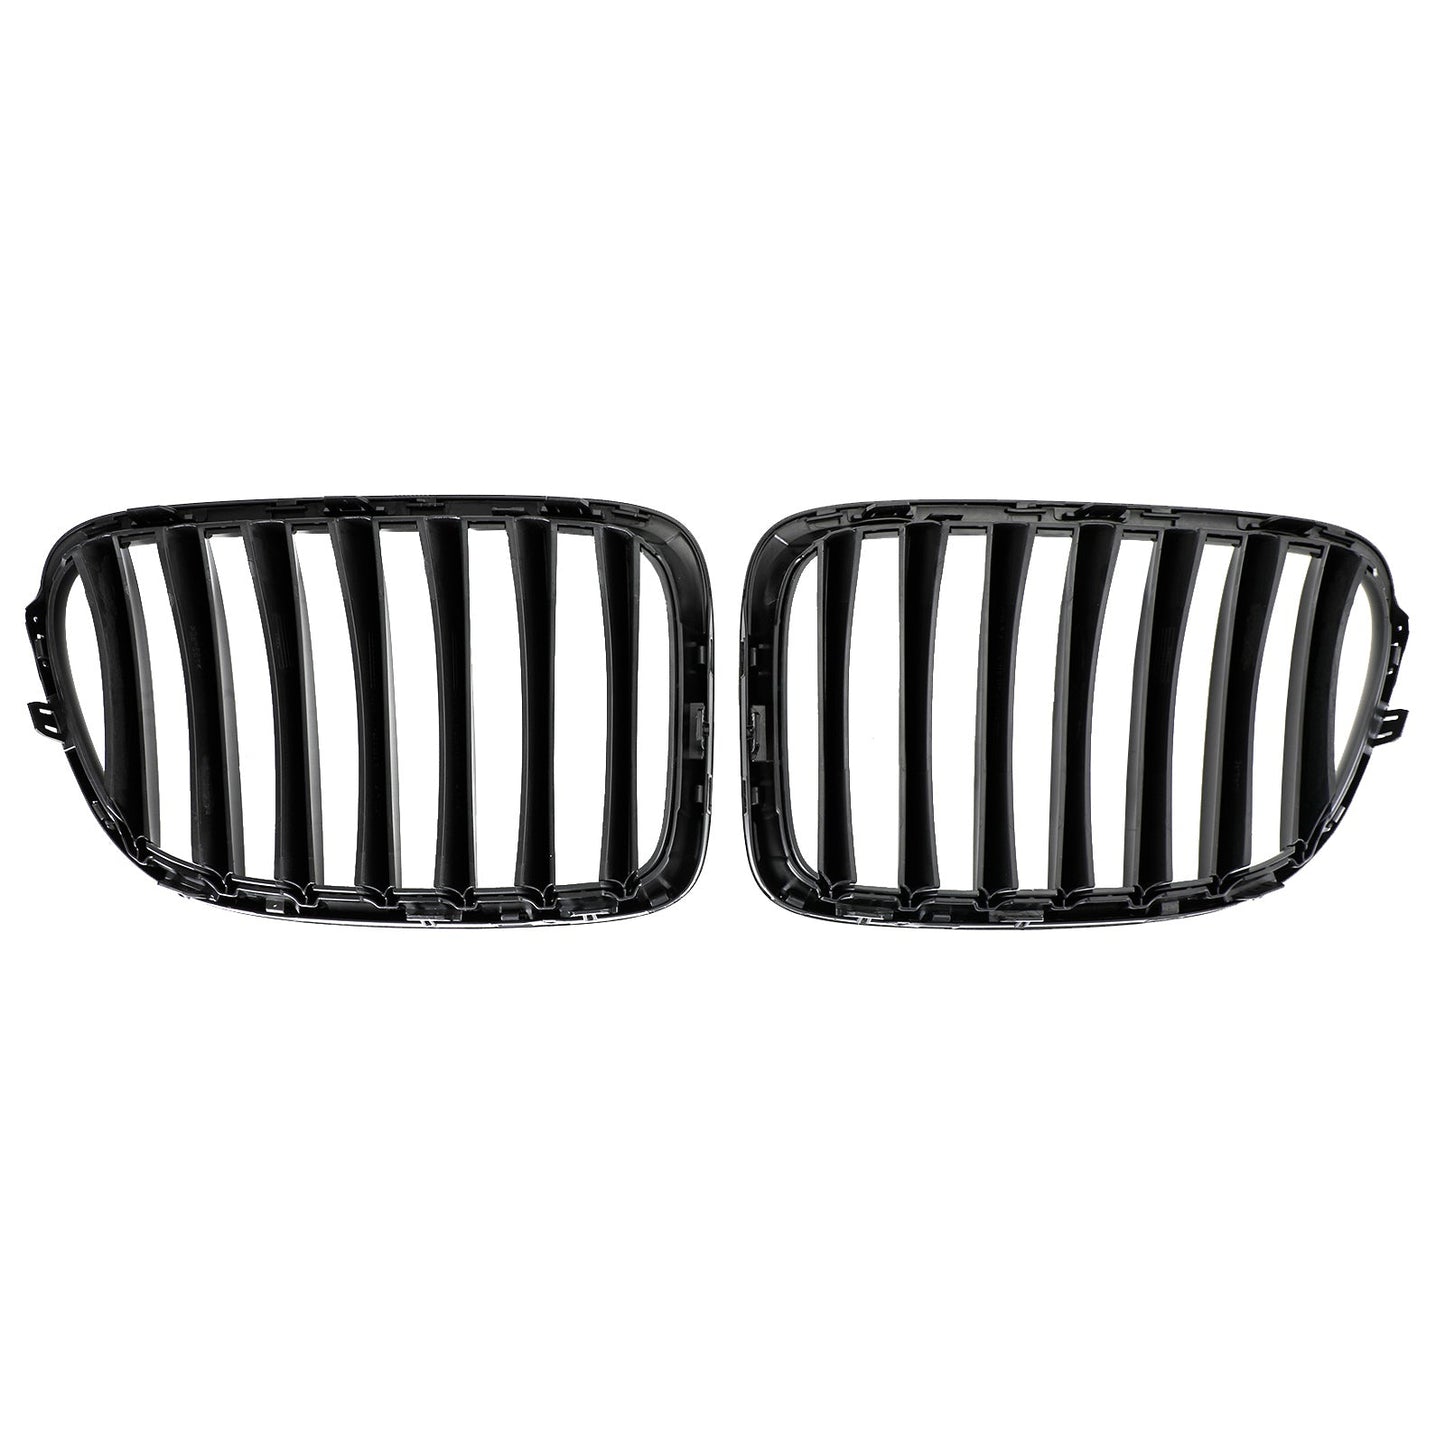 2009-2014 BMW X1 E84 SUV Gloss Black Front Hood Kidney Grill Grille